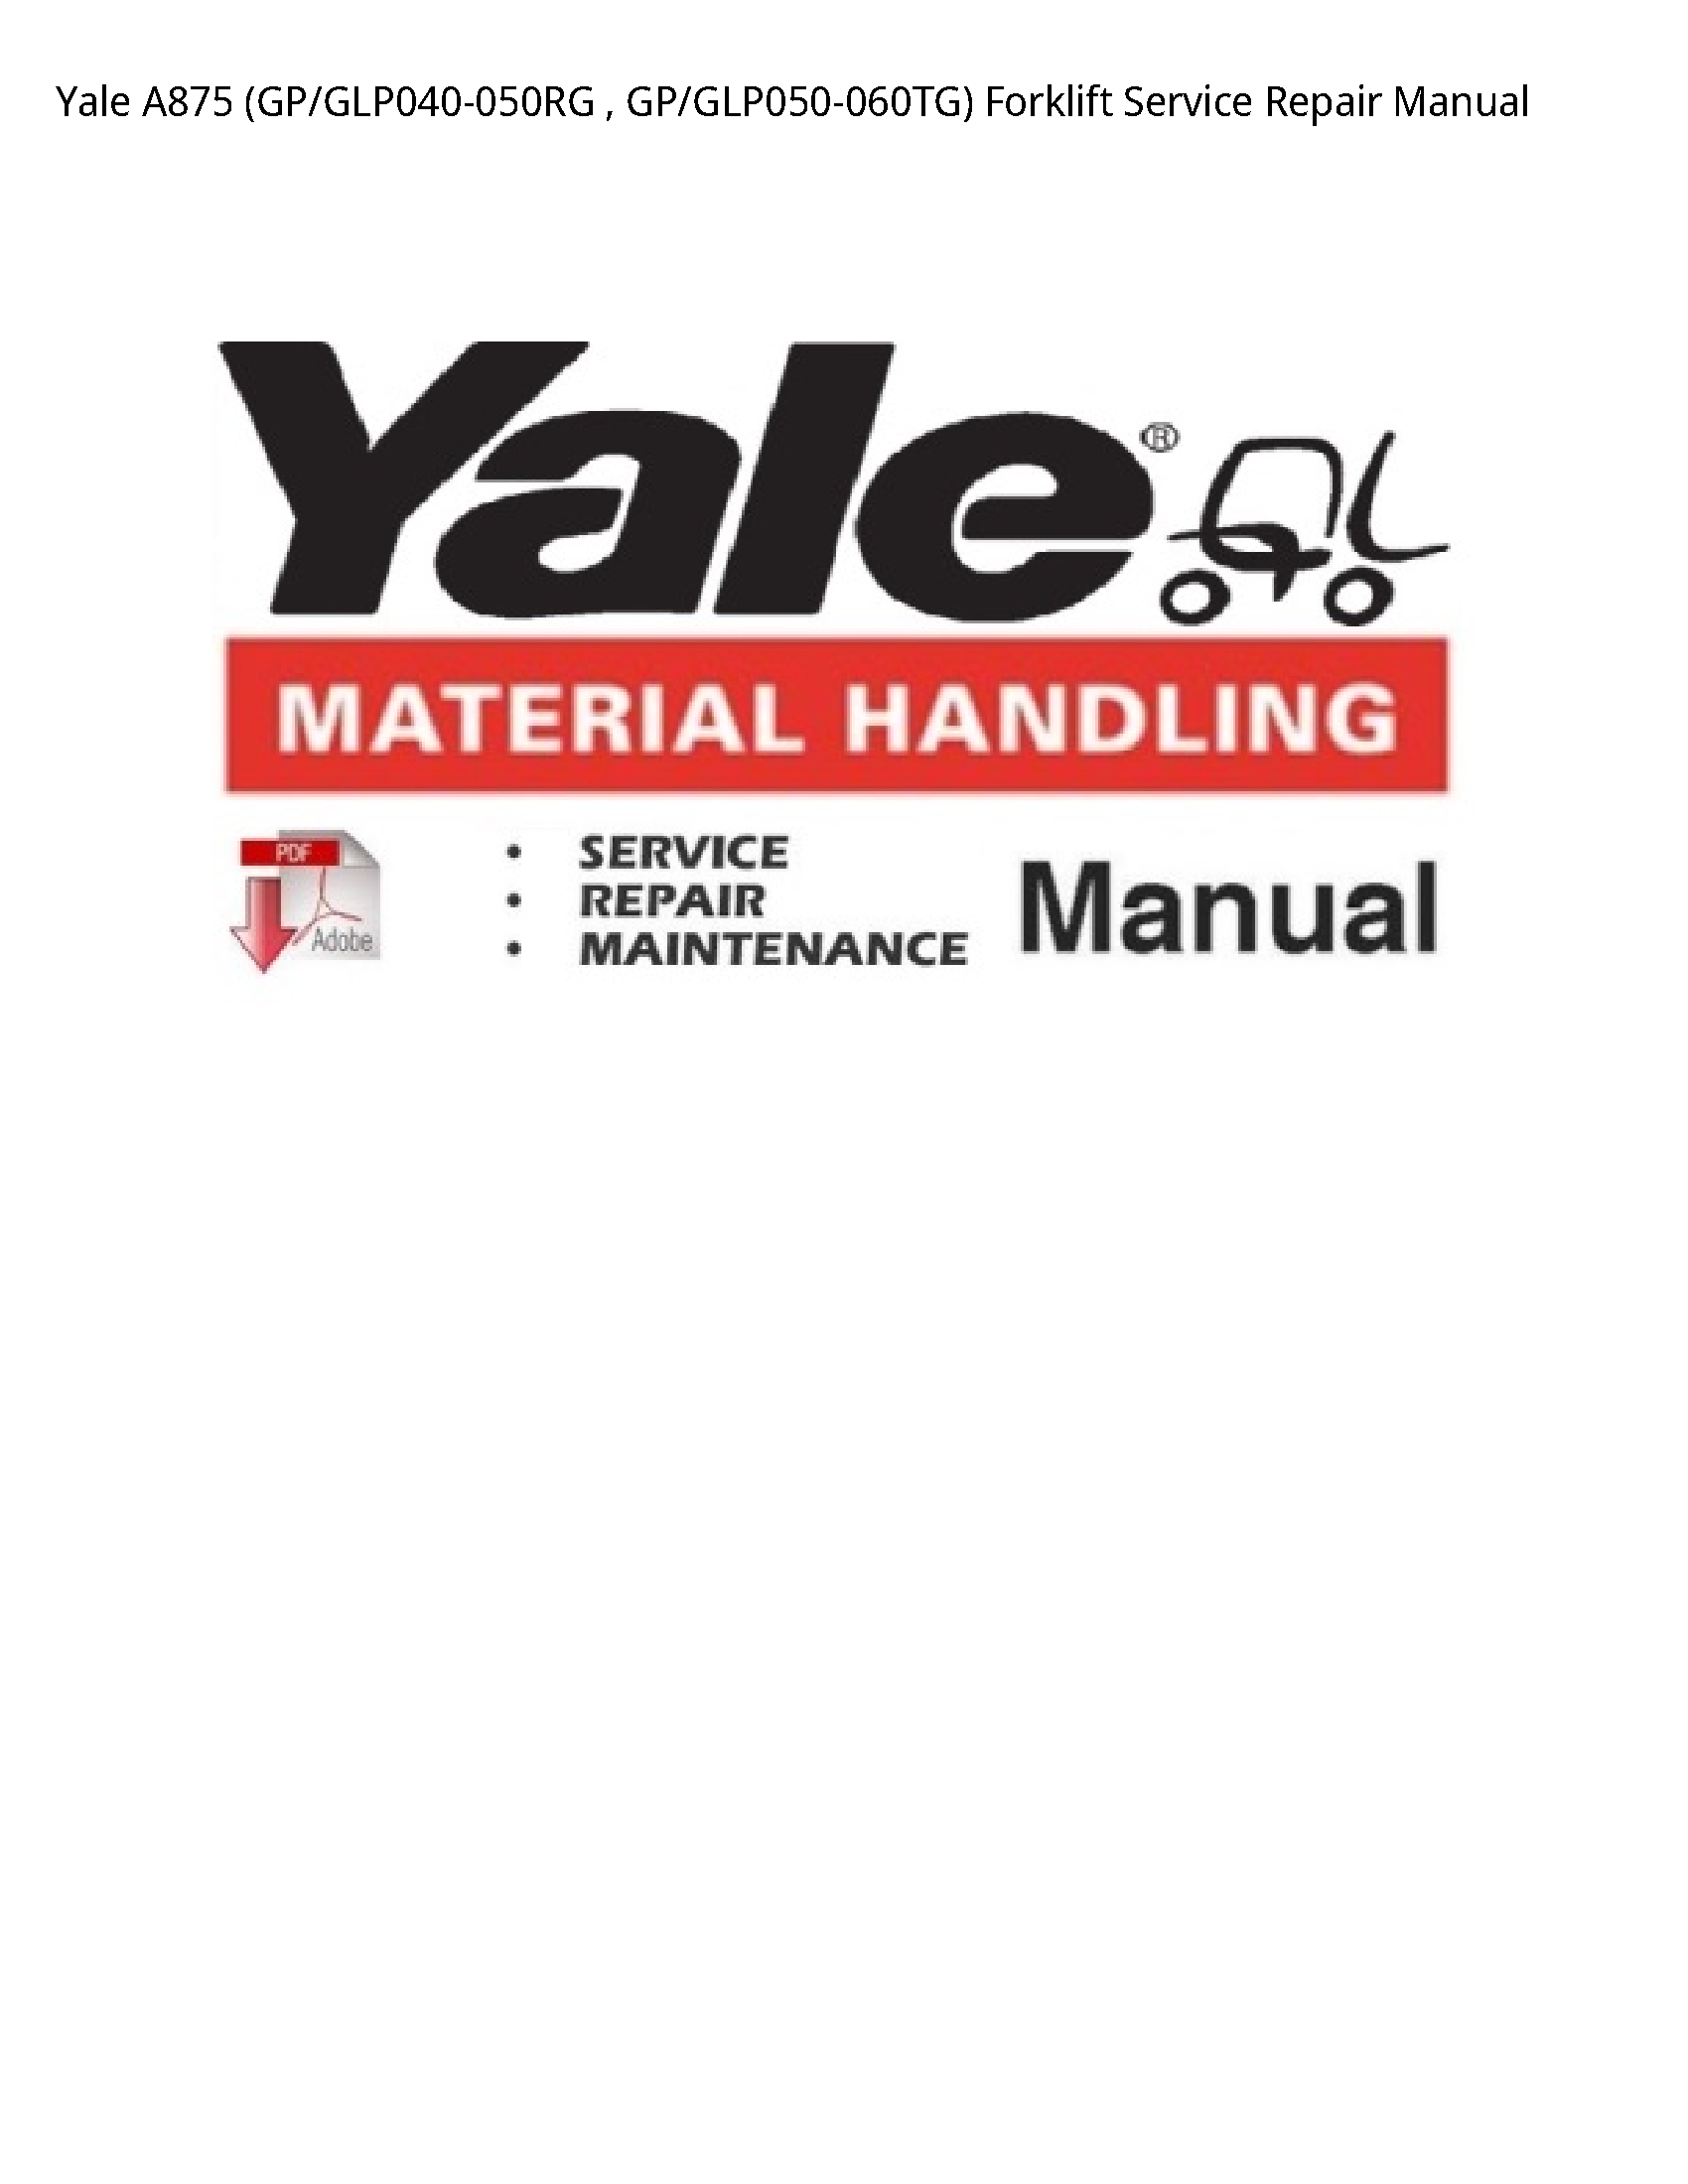 Yale A875 Forklift manual